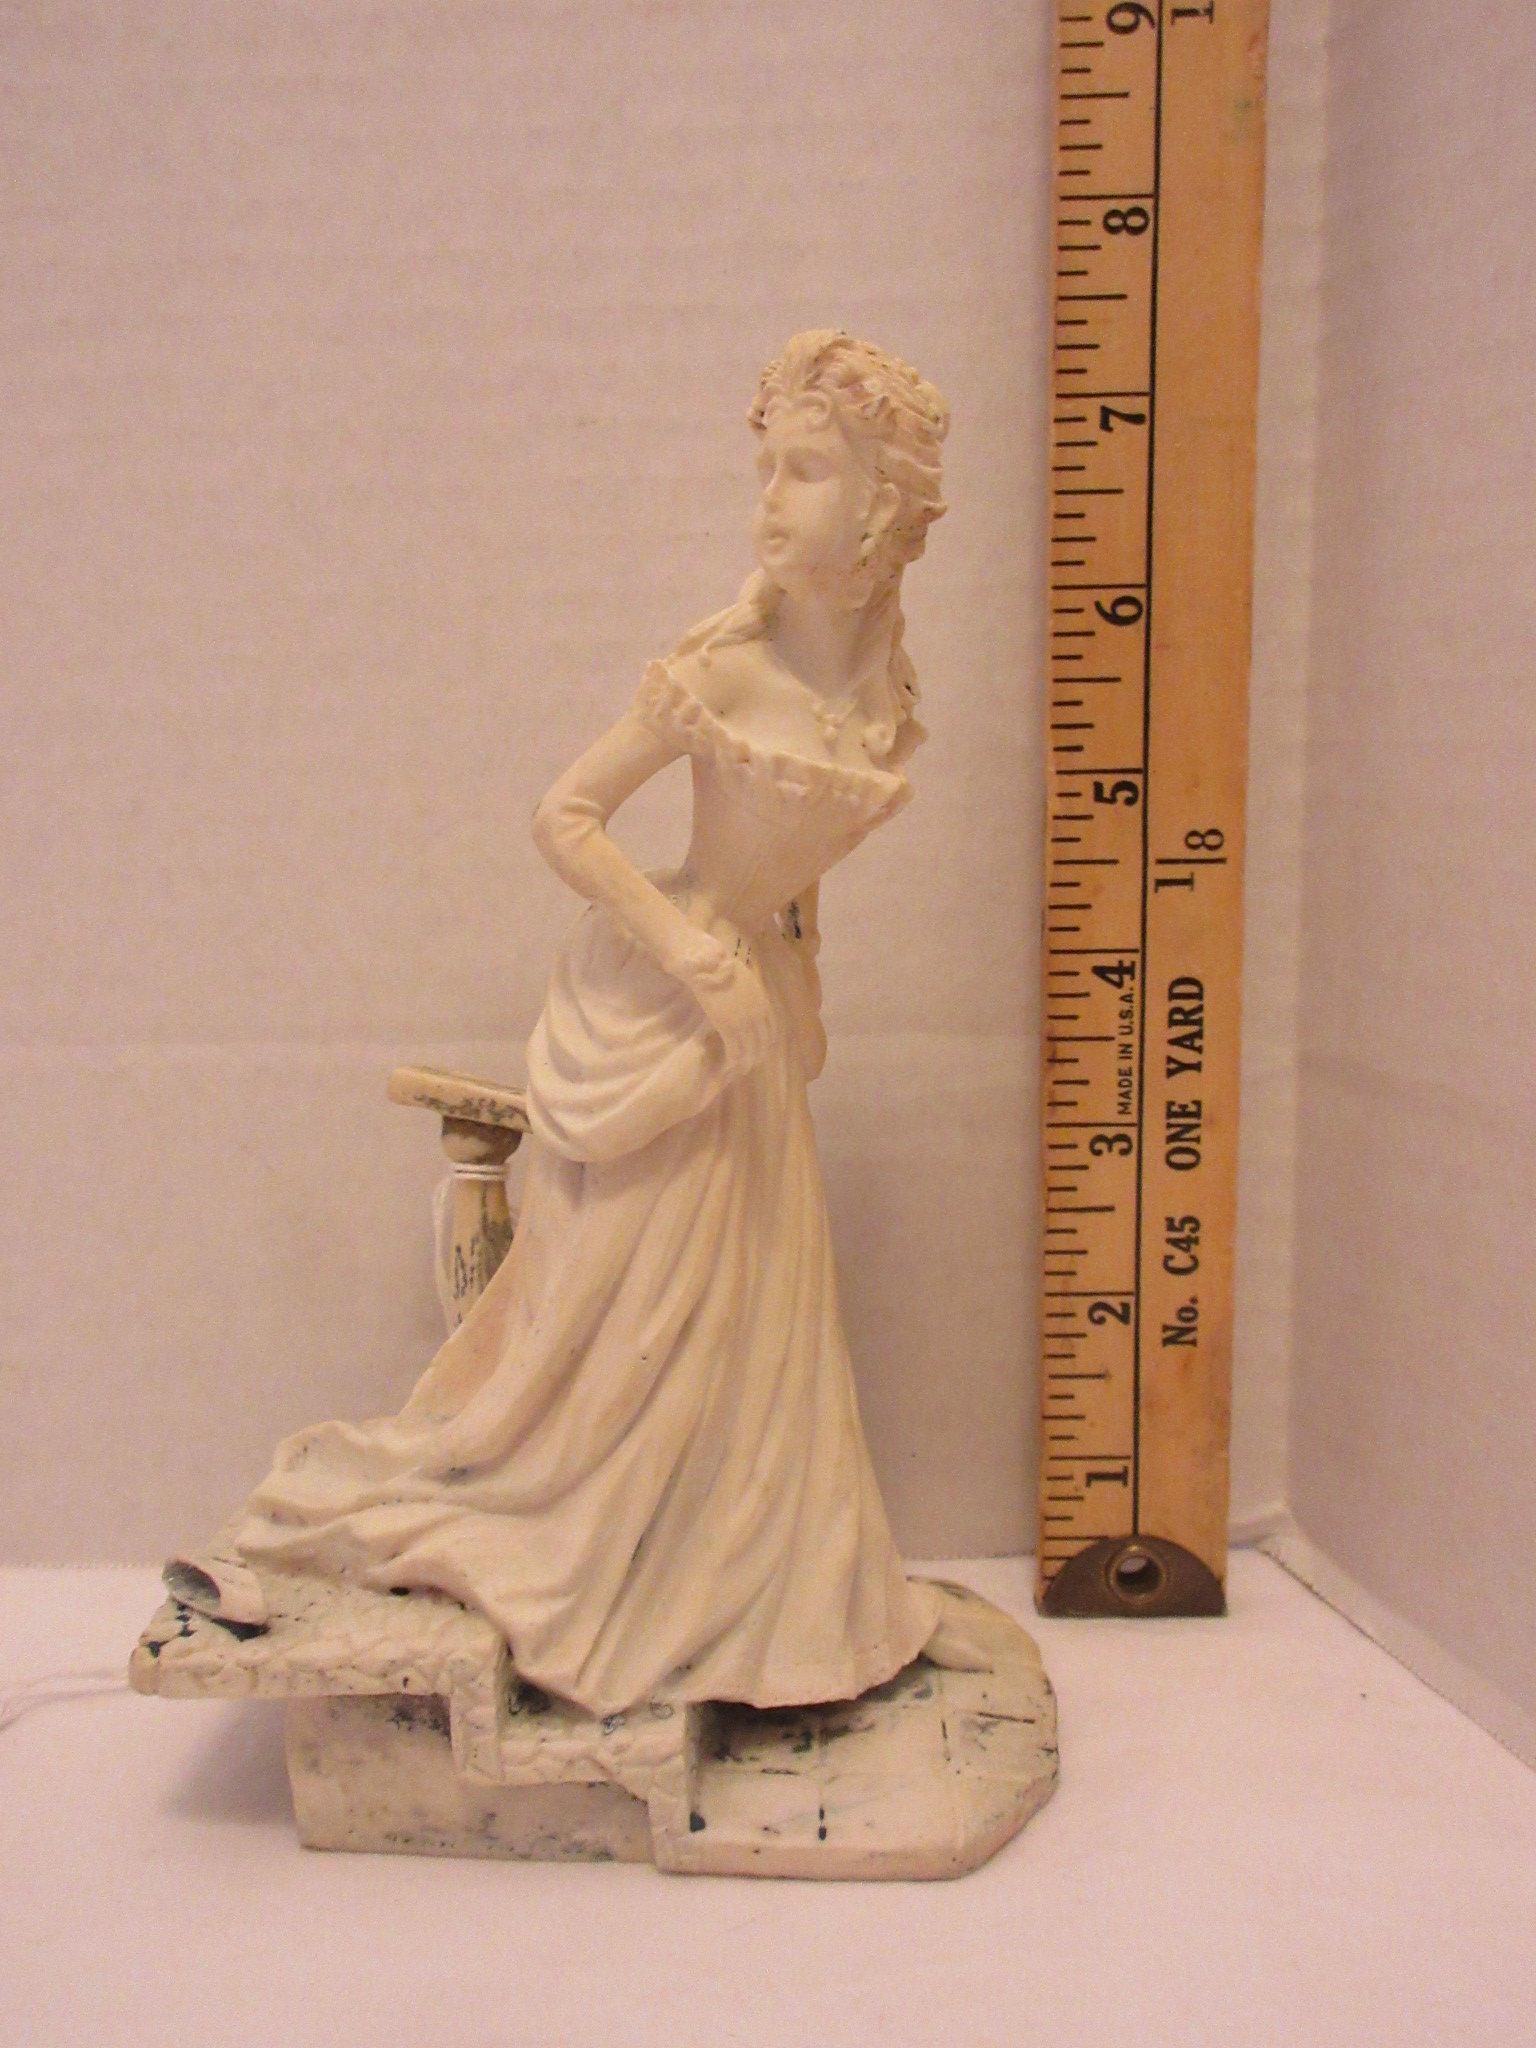 Vintage Parian Ware Figurine of Cinderella leaving the ball - slipper at her foot - 7" Tall